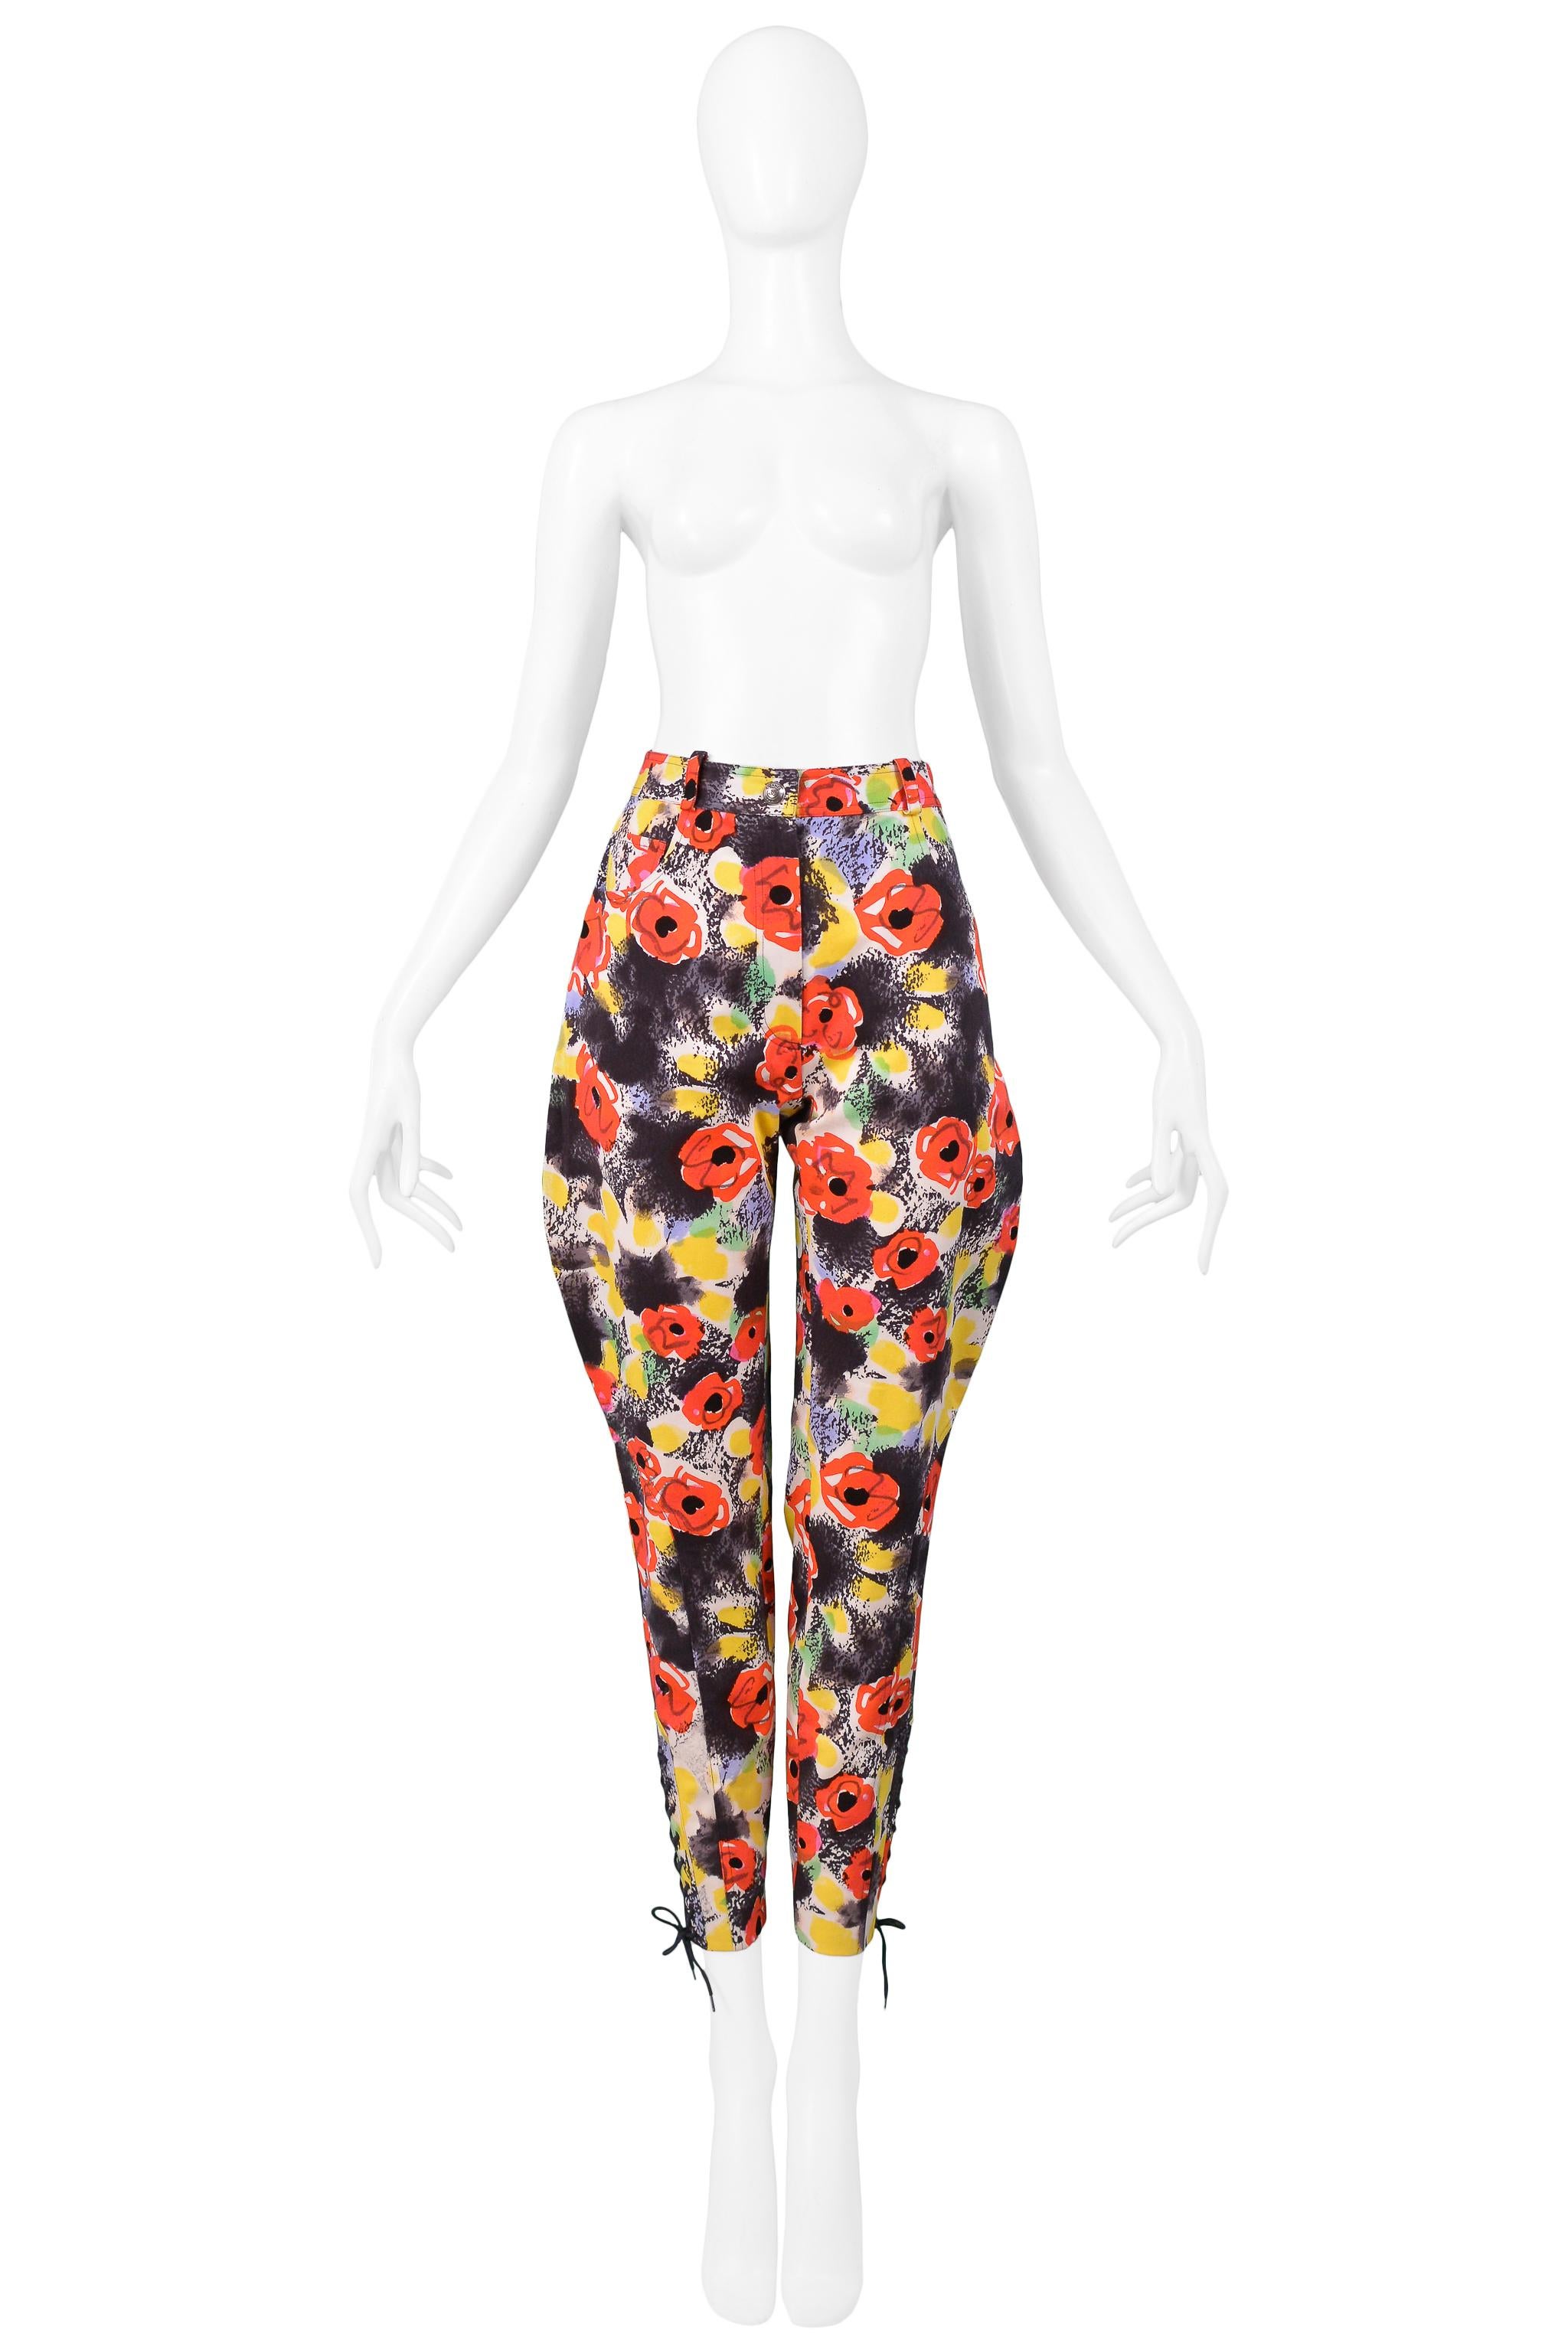 Resurrection Vintage is excited to offer a vintage Chanel by Karl Lagerfeld black, red, and yellow cotton floral print jodhpur capri pants, featuring a high waist, corset laces at the ankles, and front fly zipper. From the 1997 Chanel runway